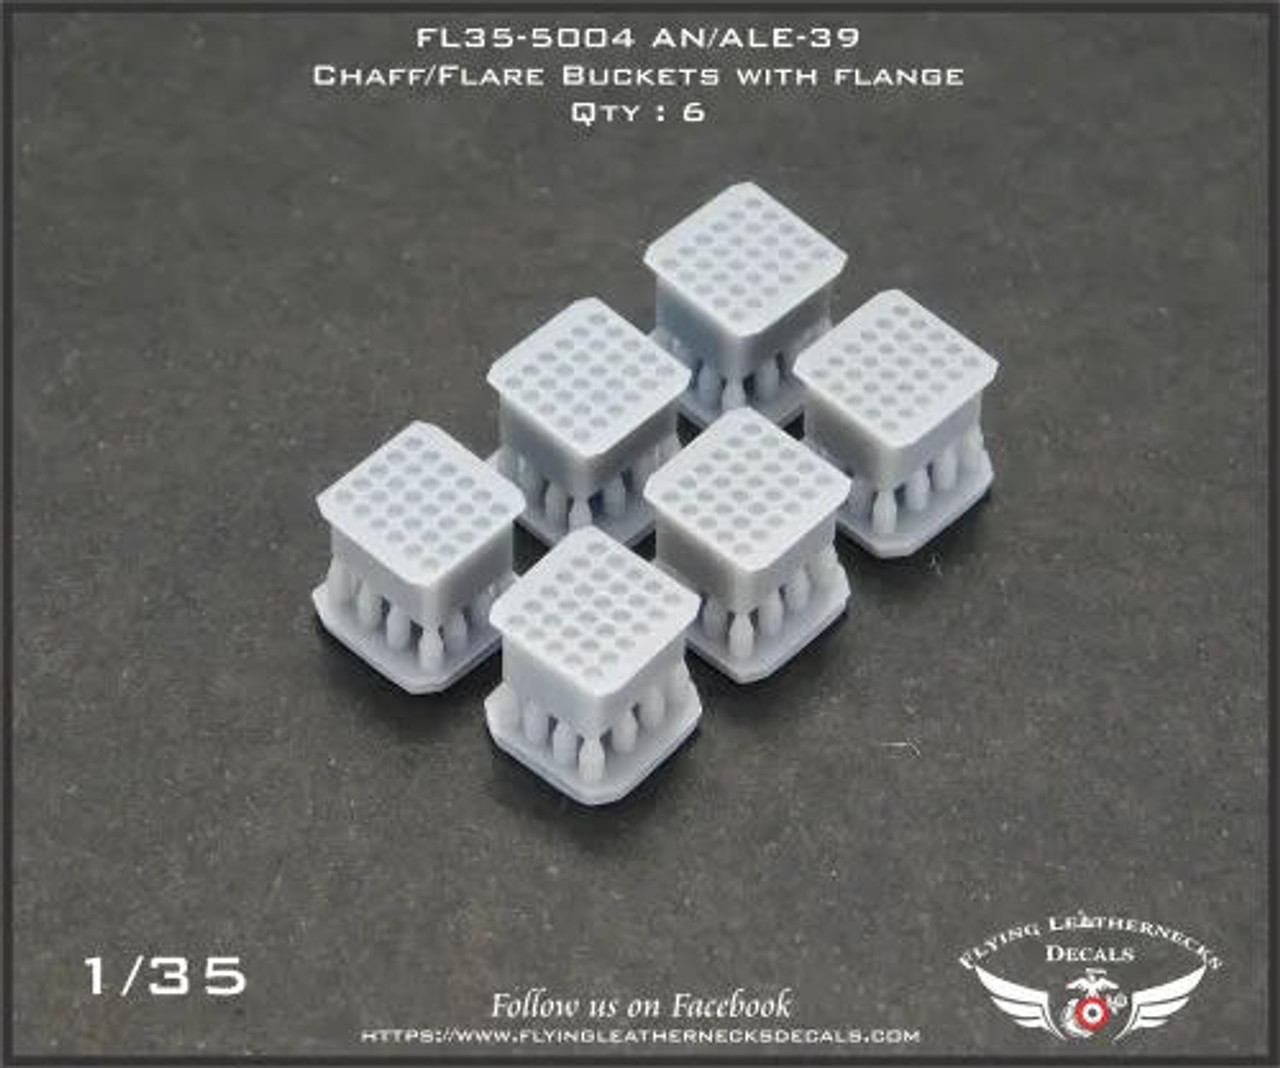 FLN-35-5004 1/35 Flying Leathernecks AN/ALE-39 Chaff/Flare buckets with flange MMD Squadron